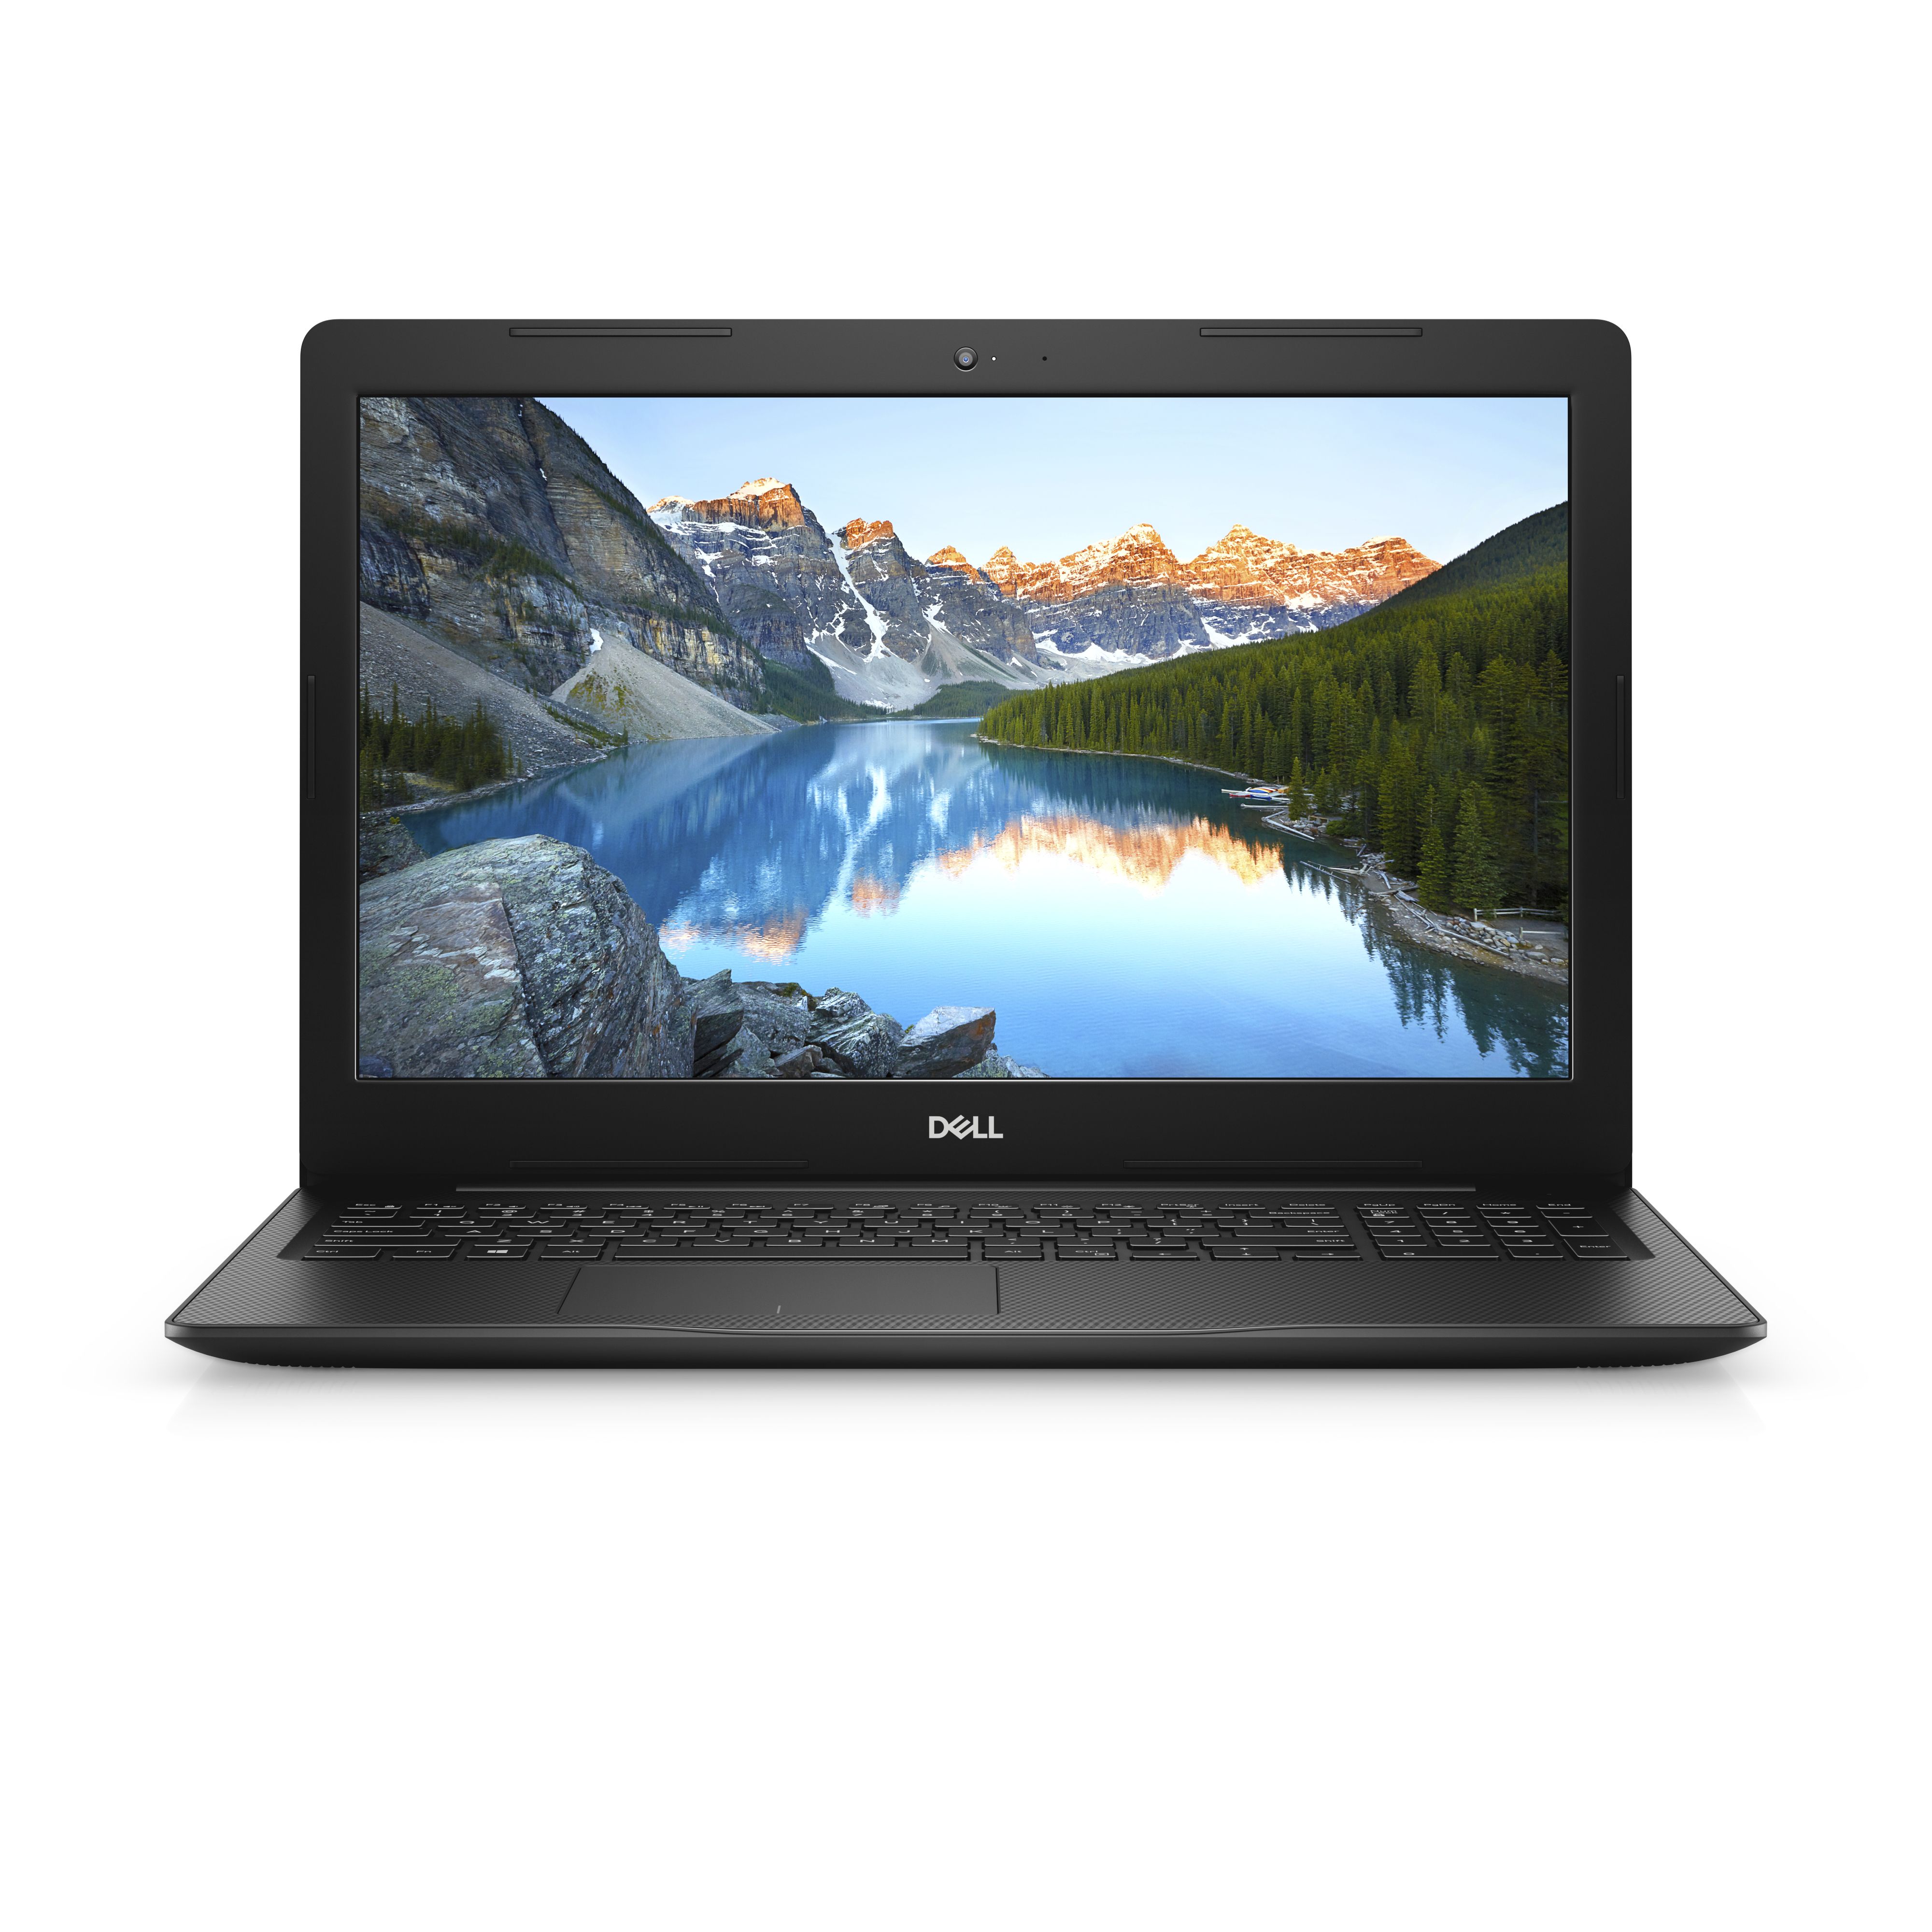 Dell Inspiron 3583 Celeron 4205u 4gb Ram 500gb Hdd 15 6 Hd Laptop Incredible Connection